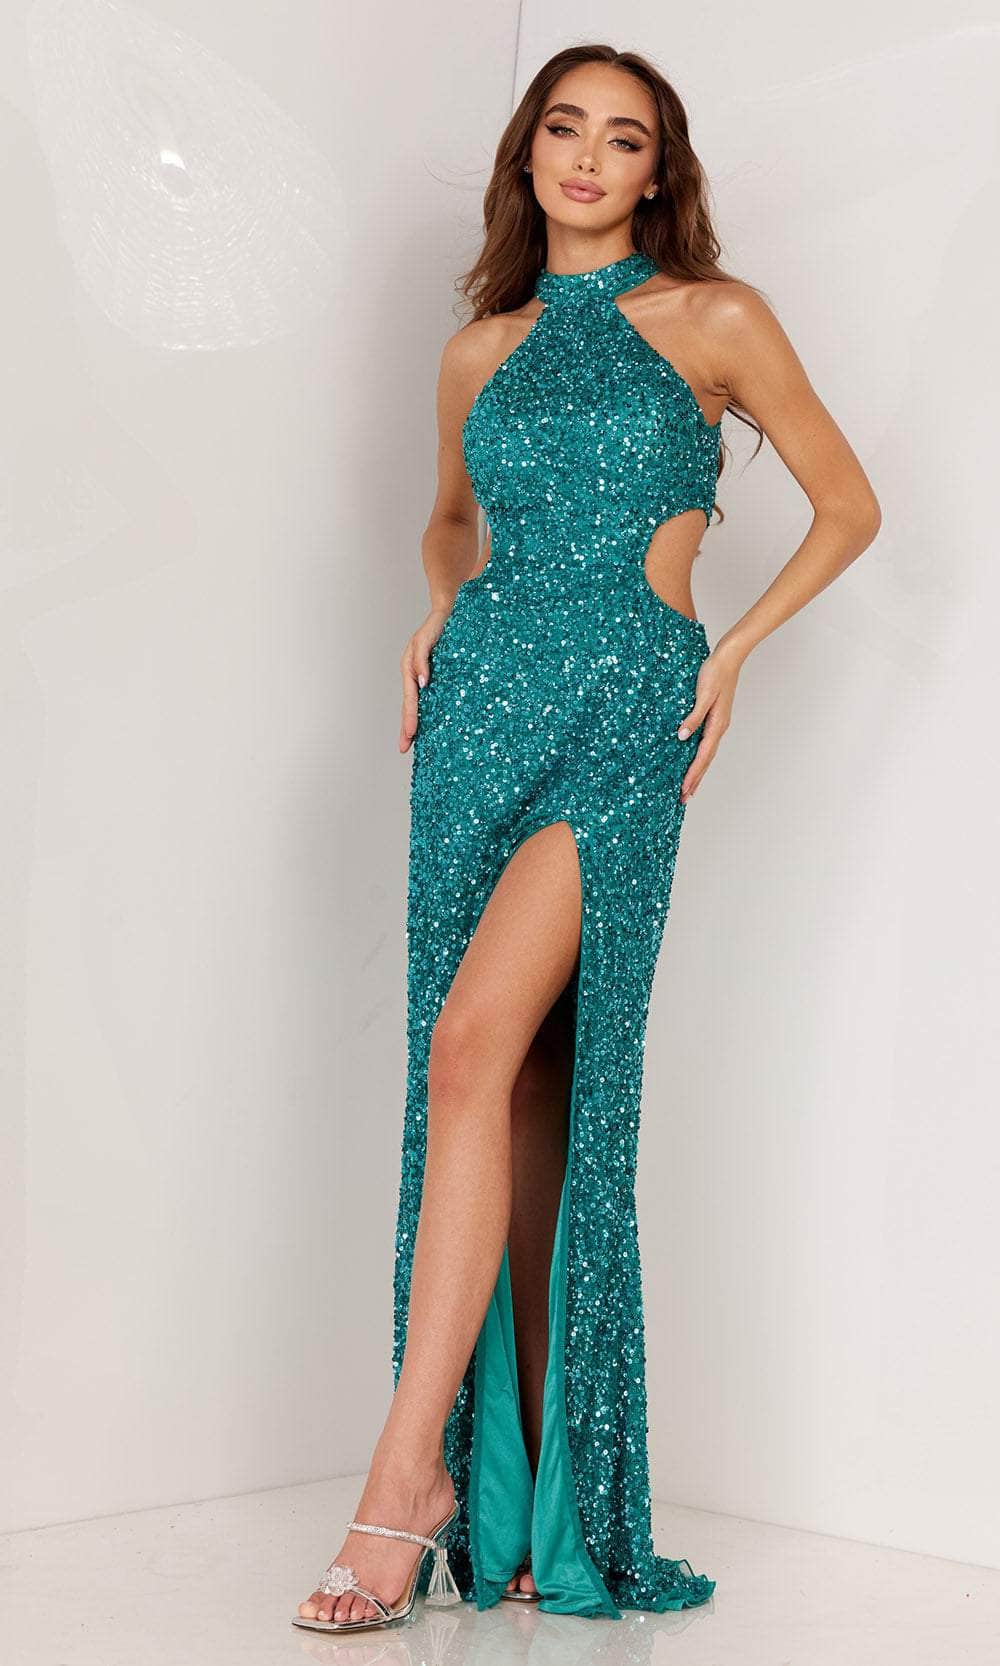 Aleta Couture 1215 - Sparkling Side Cut-Out Gown Special Occasion Dresses 000 / Teal